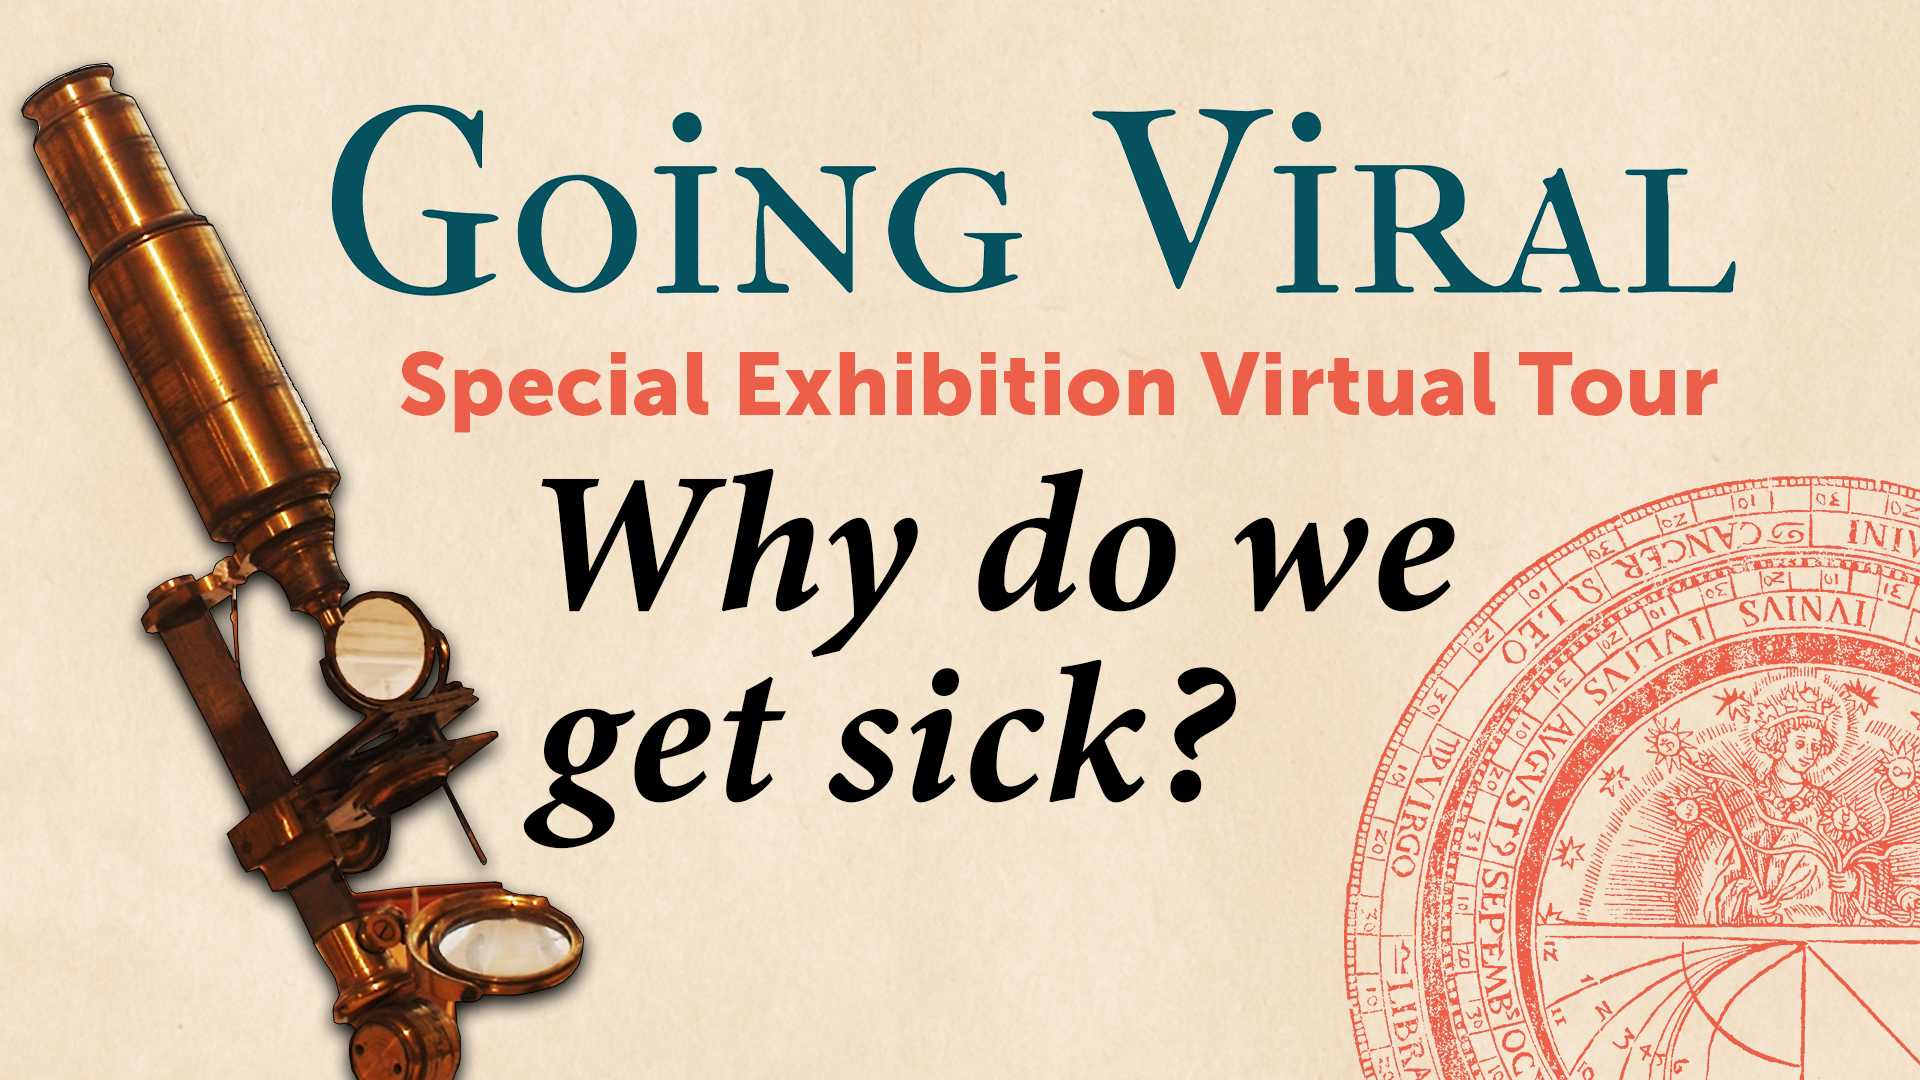 Photograph of antique microscope, with text that reads "Going Viral Special Exhibition Virtual Tour" "Why do we get sick?"